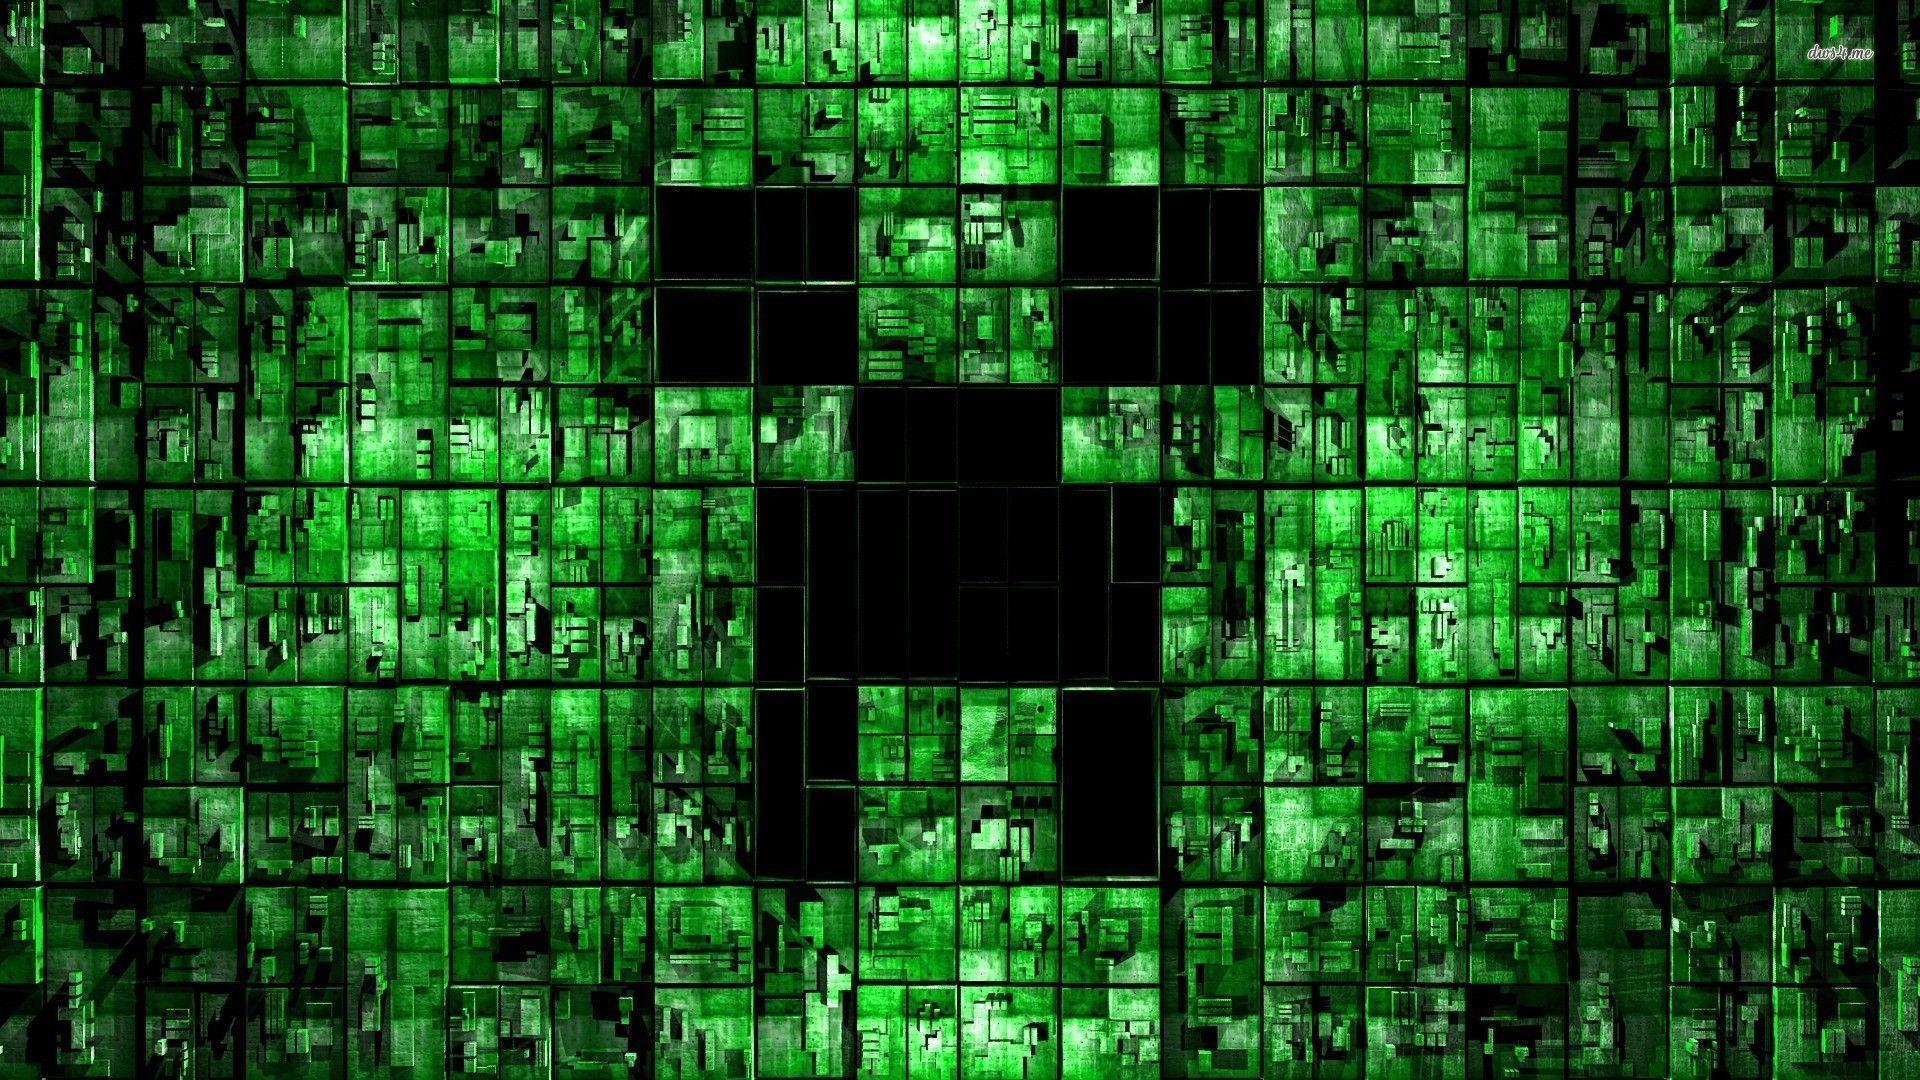 Creeper Minecraft Game Wallpaper 1920x1080 px Free Download